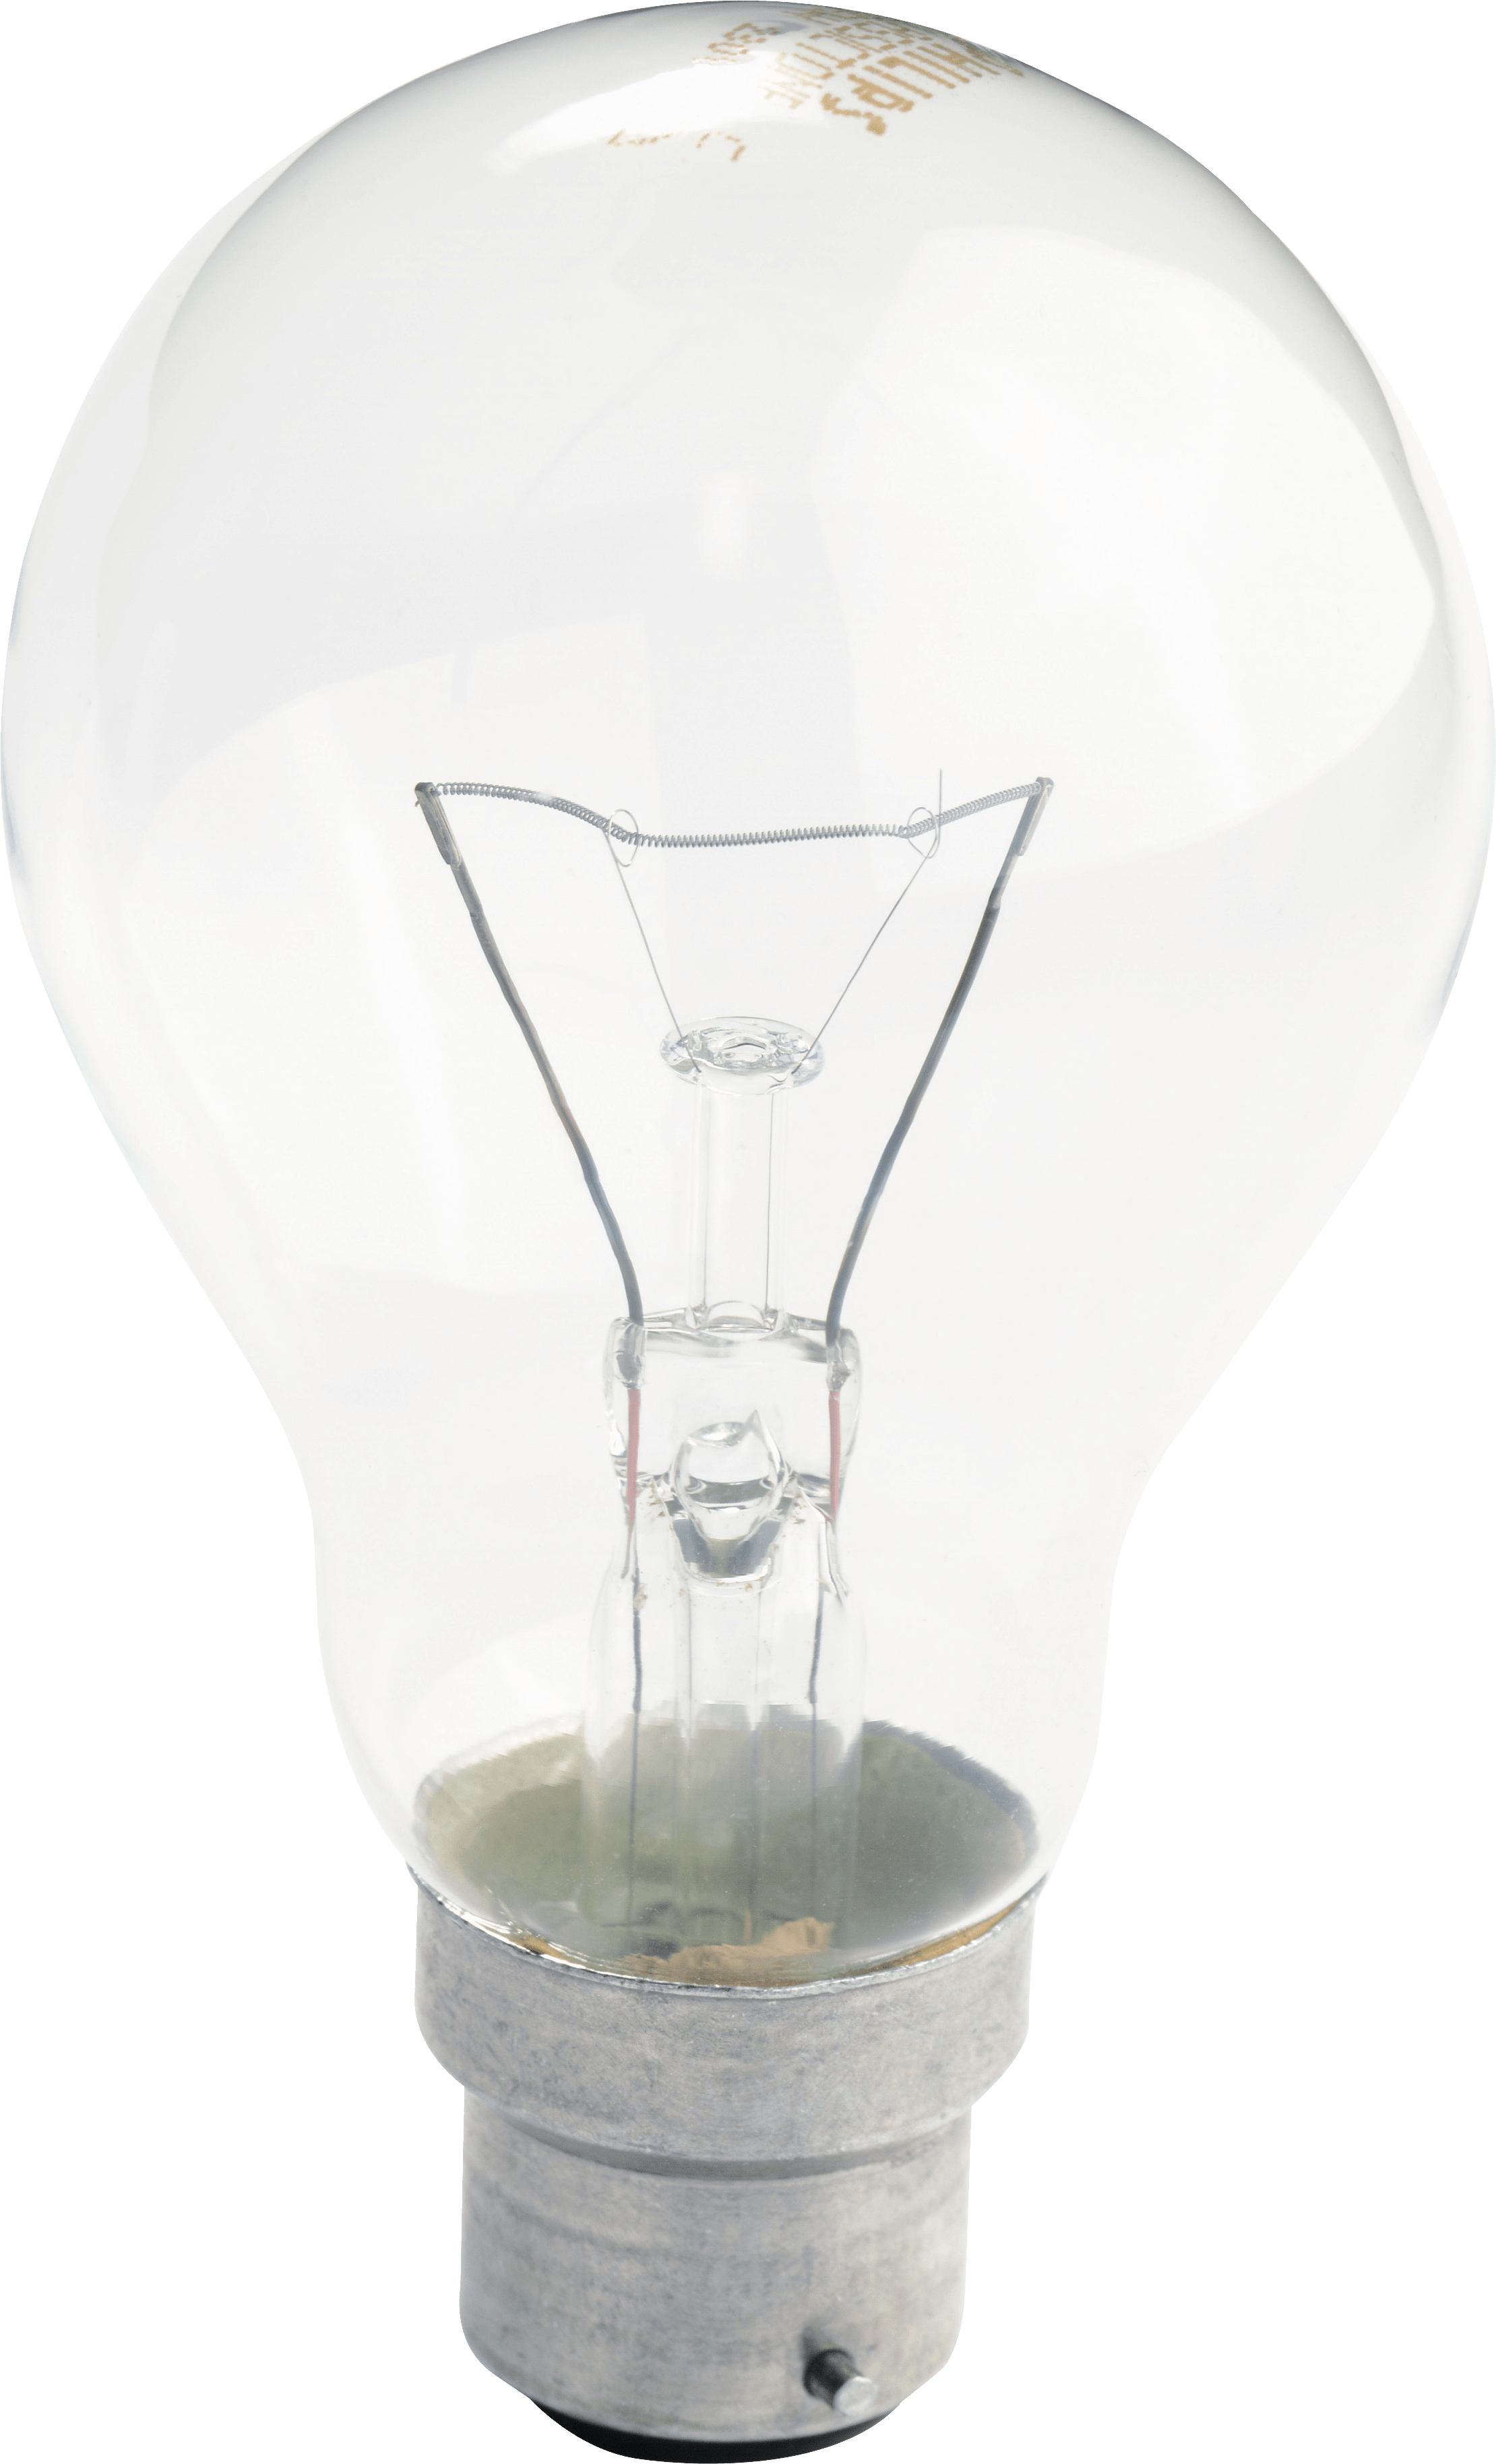 Electric Lamp Png Image PNG Image